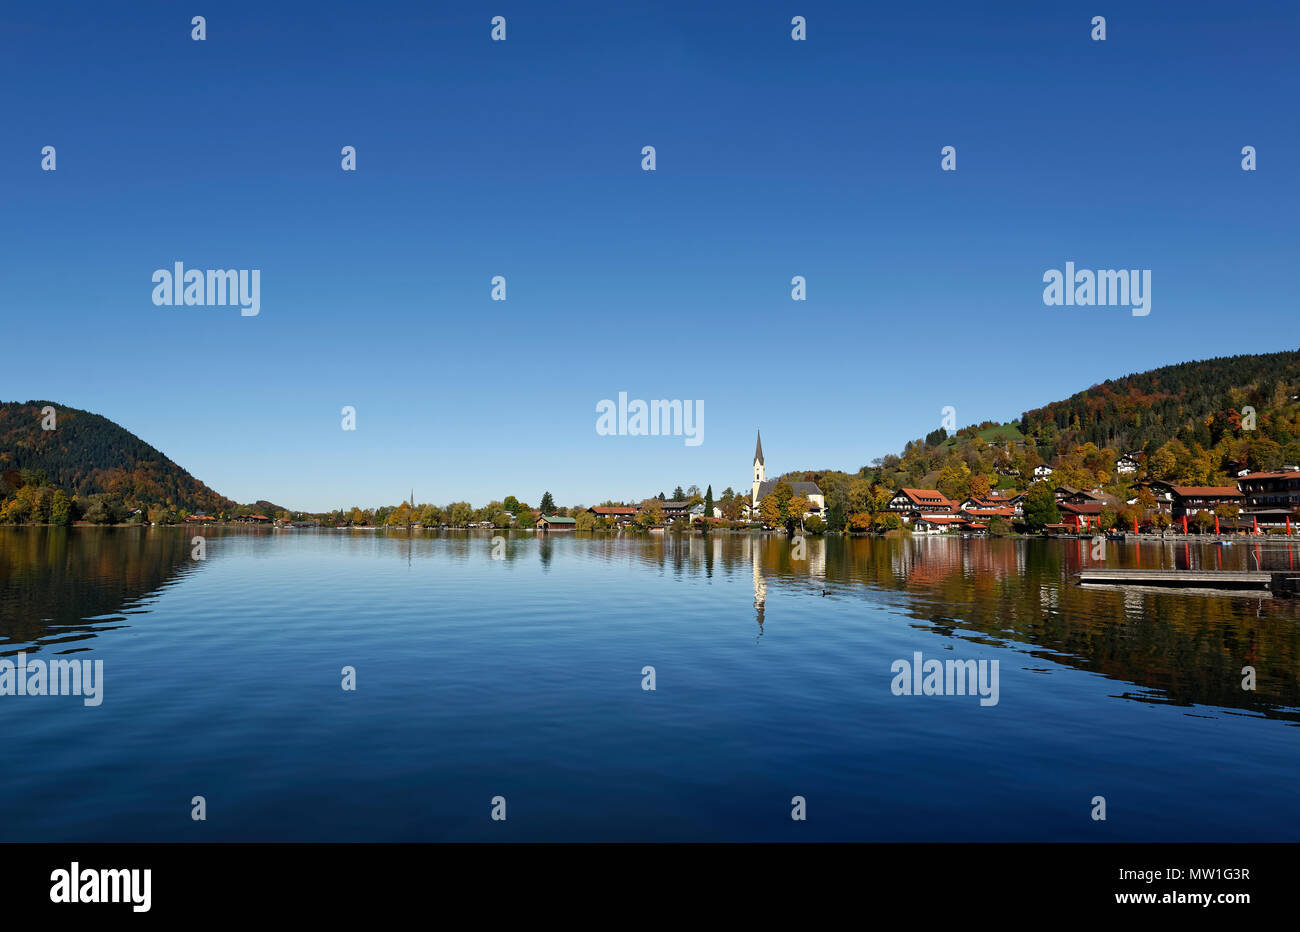 View of Schliersee with parish church St. Sixtus and lake, Schliersee, Upper Bavaria, Bavaria, Germany Stock Photo